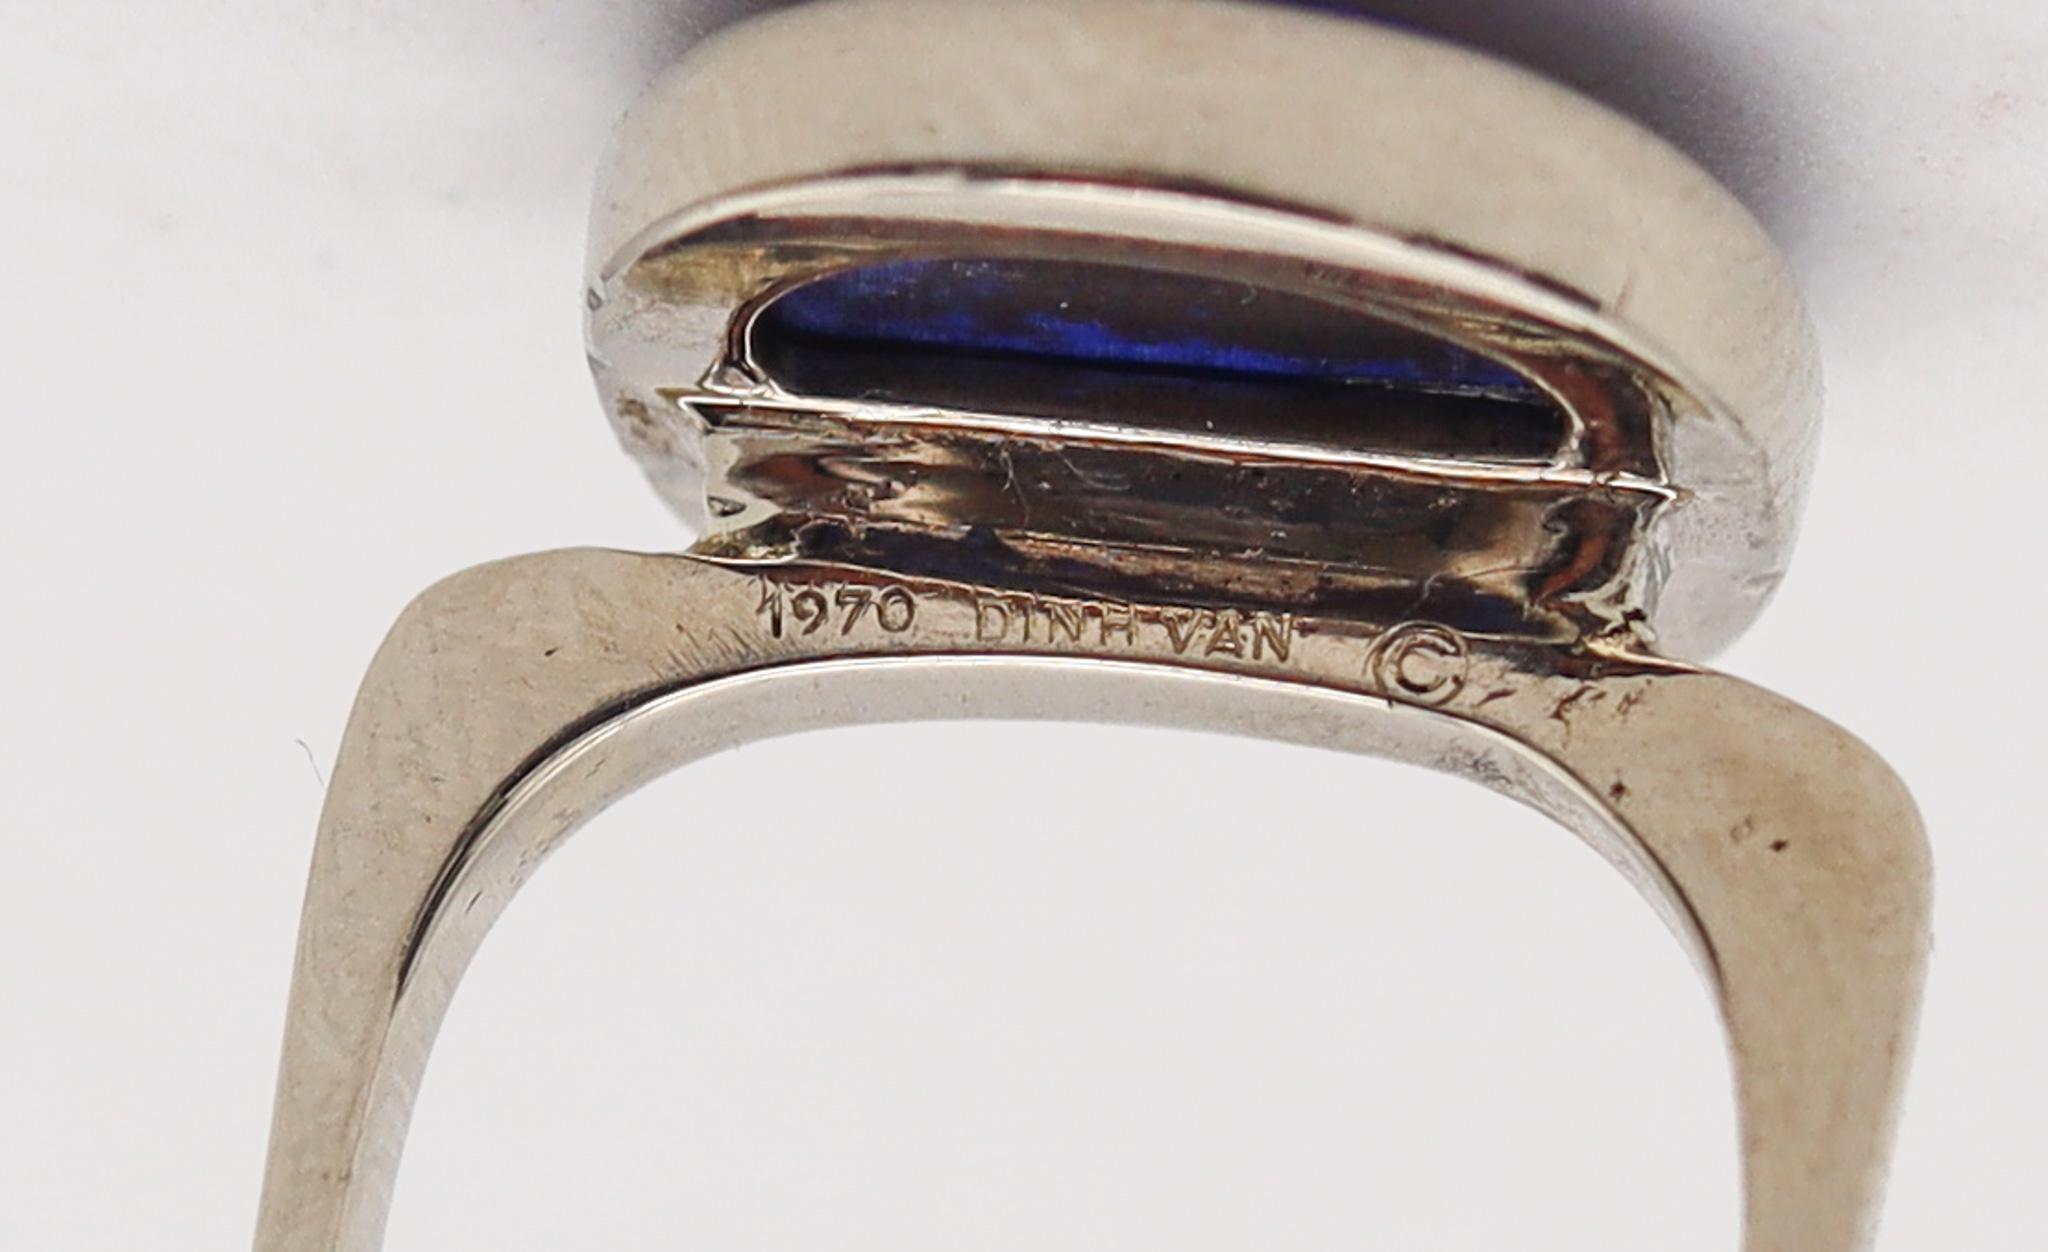 Dinh Van 1970 Paris Geometric Sculptural Ring In 18Kt White Gold With Lapis In Excellent Condition For Sale In Miami, FL